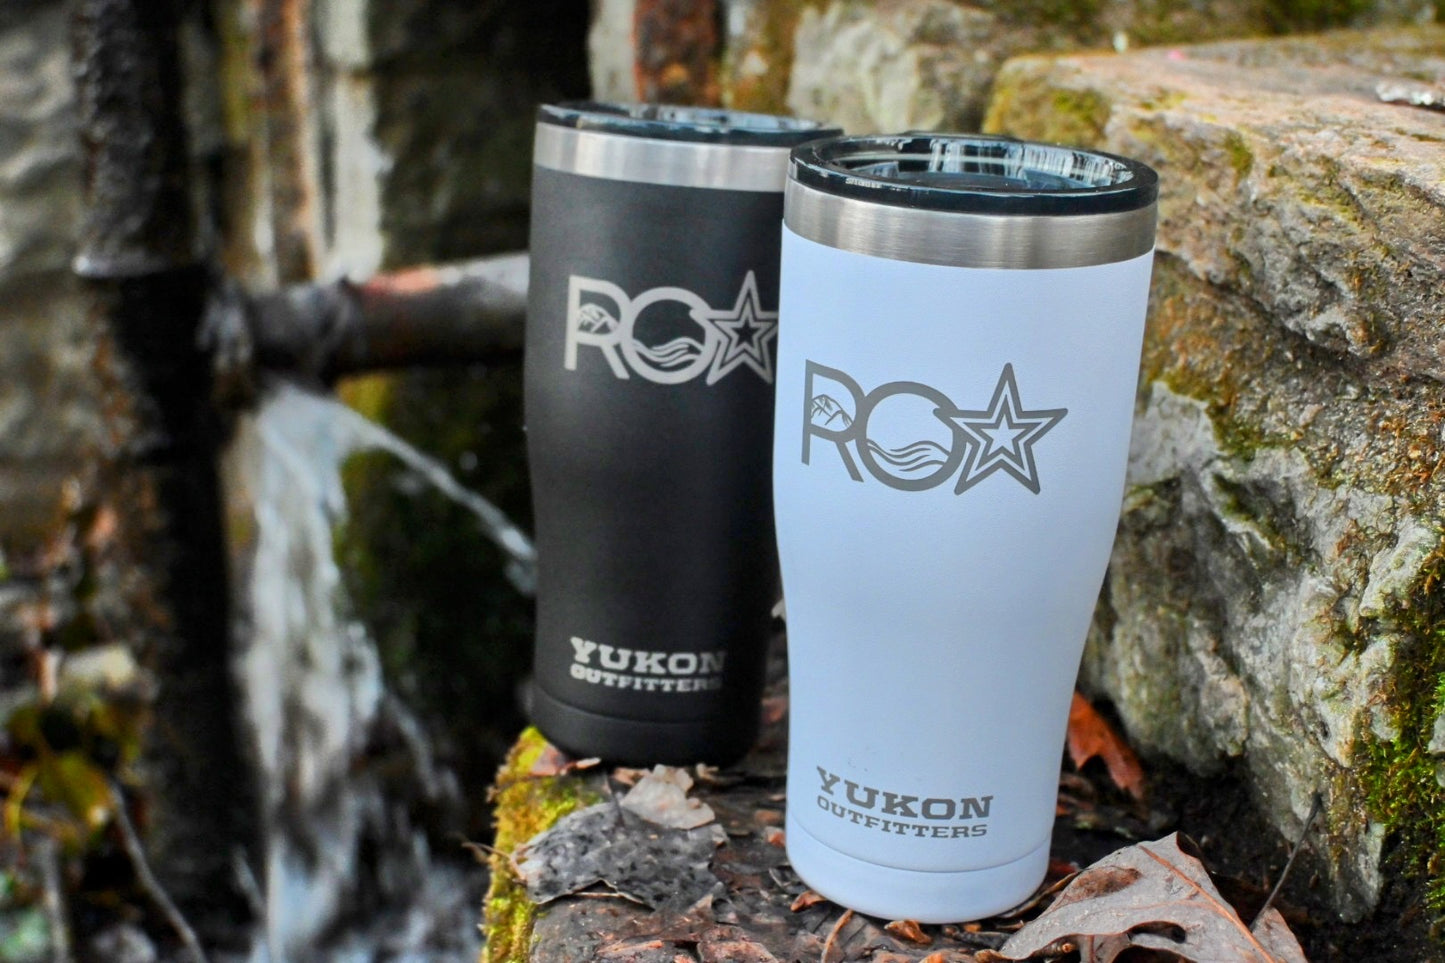 Roanoke Lifestyle - 16 oz. Insulated Cup